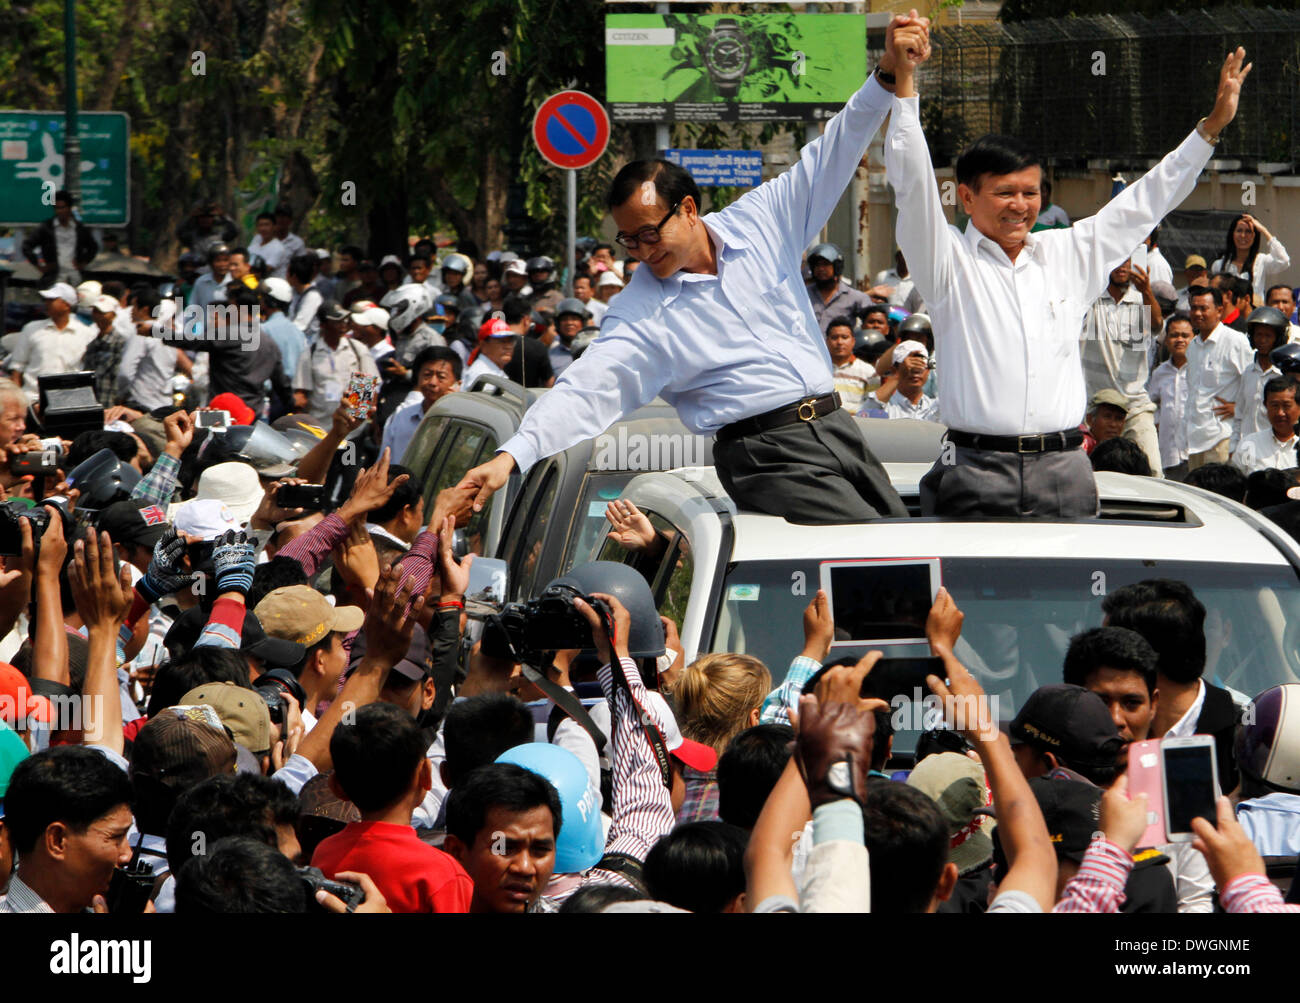 Phnom Penh, Cambodia. 8th Mar, 2014. Sam Rainsy (L, upper), leader of the opposition Cambodia National Rescue Party, and his deputy Kem Sokha (R, upper) appear at a rally near the Freedom Park in Phnom Penh, Cambodia, March 8, 2014. Hundreds of opposition-aligned trade union activists and workers illegally rallied on a street near the capital's Freedom Park on Saturday morning, calling for higher wages and release of 21 detained protesters. Credit:  Sovannara/Xinhua/Alamy Live News Stock Photo